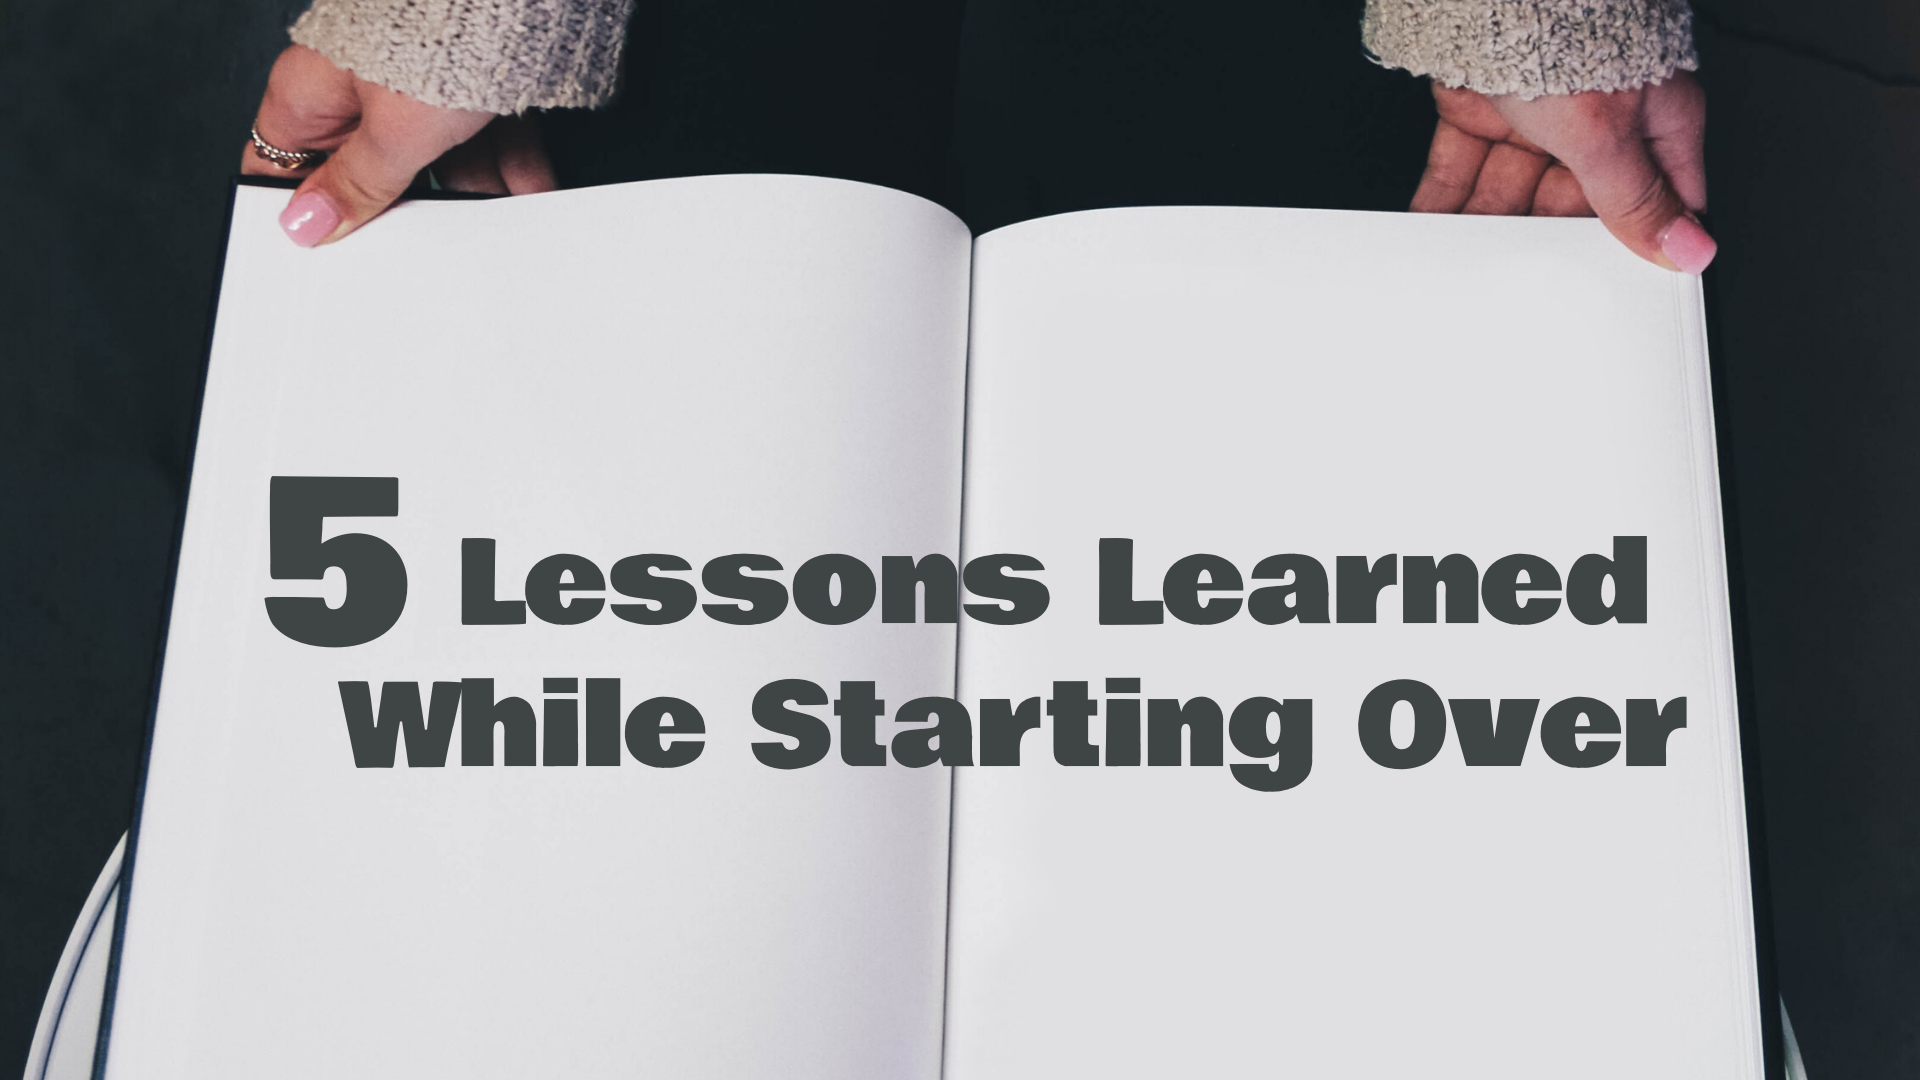 5 Lessons Learned While Starting Over